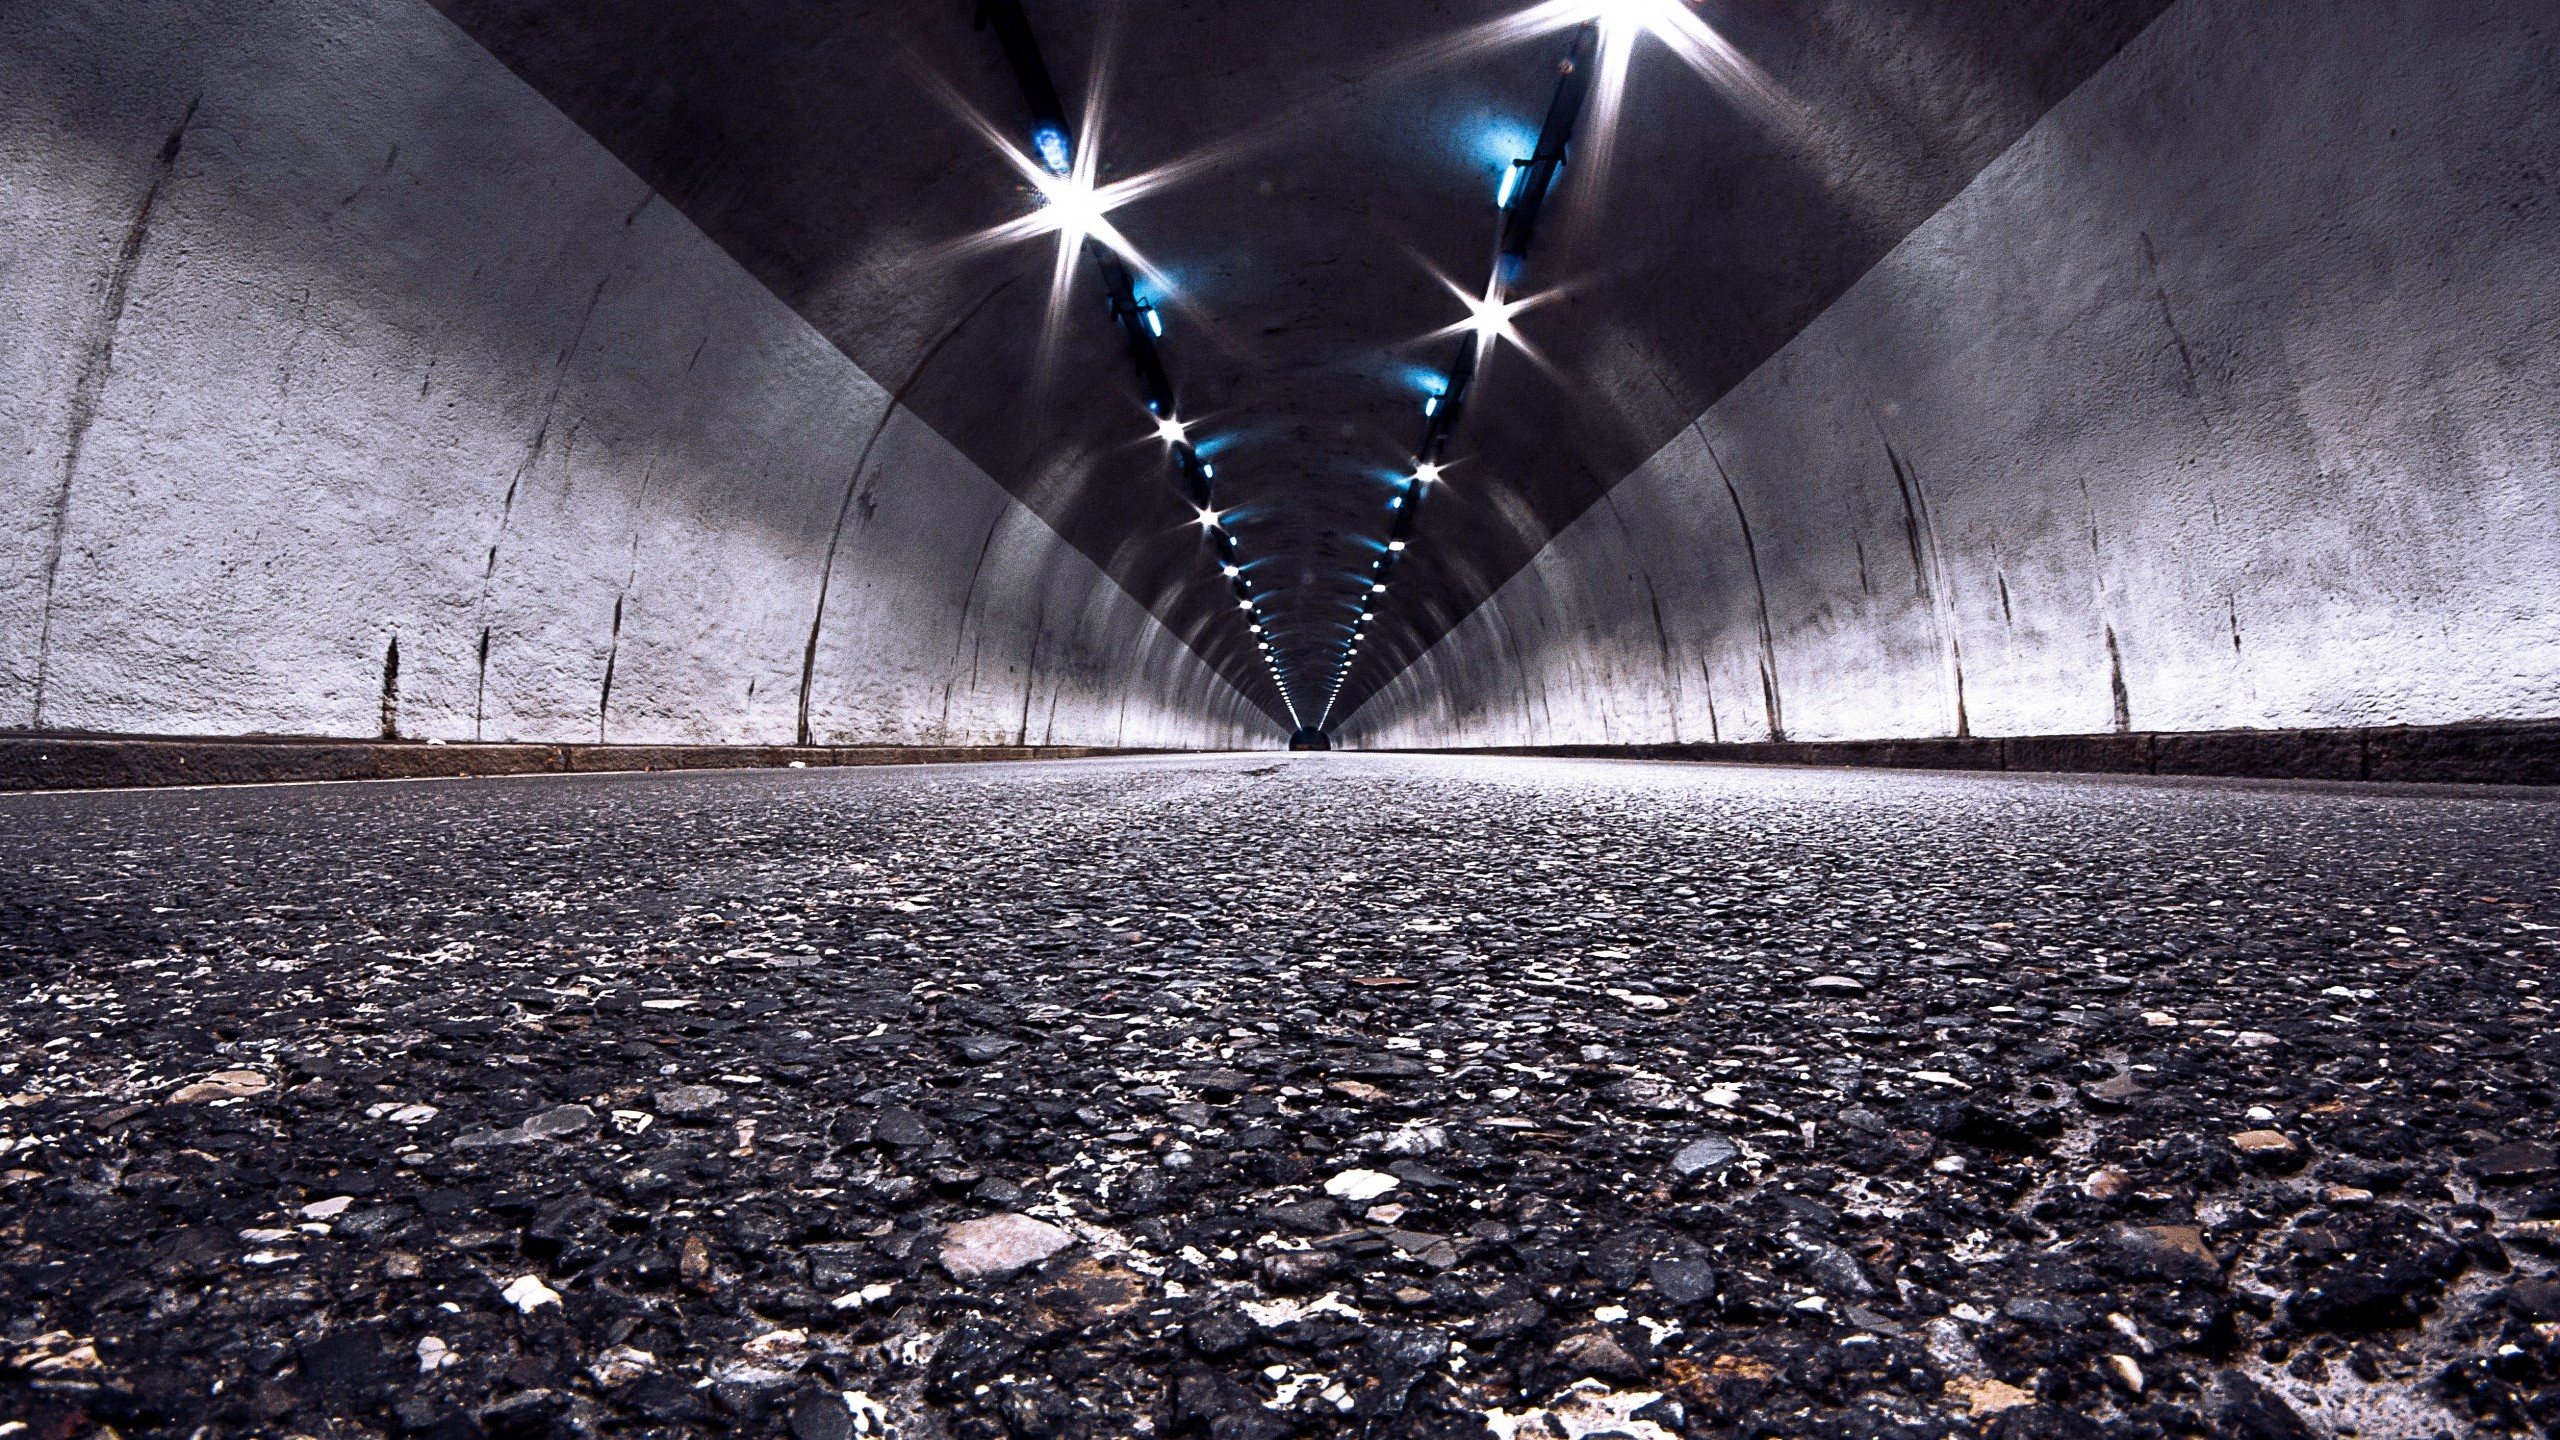 General 2560x1440 road tunnel lights stones concrete wall arch depth of field worm's eye view